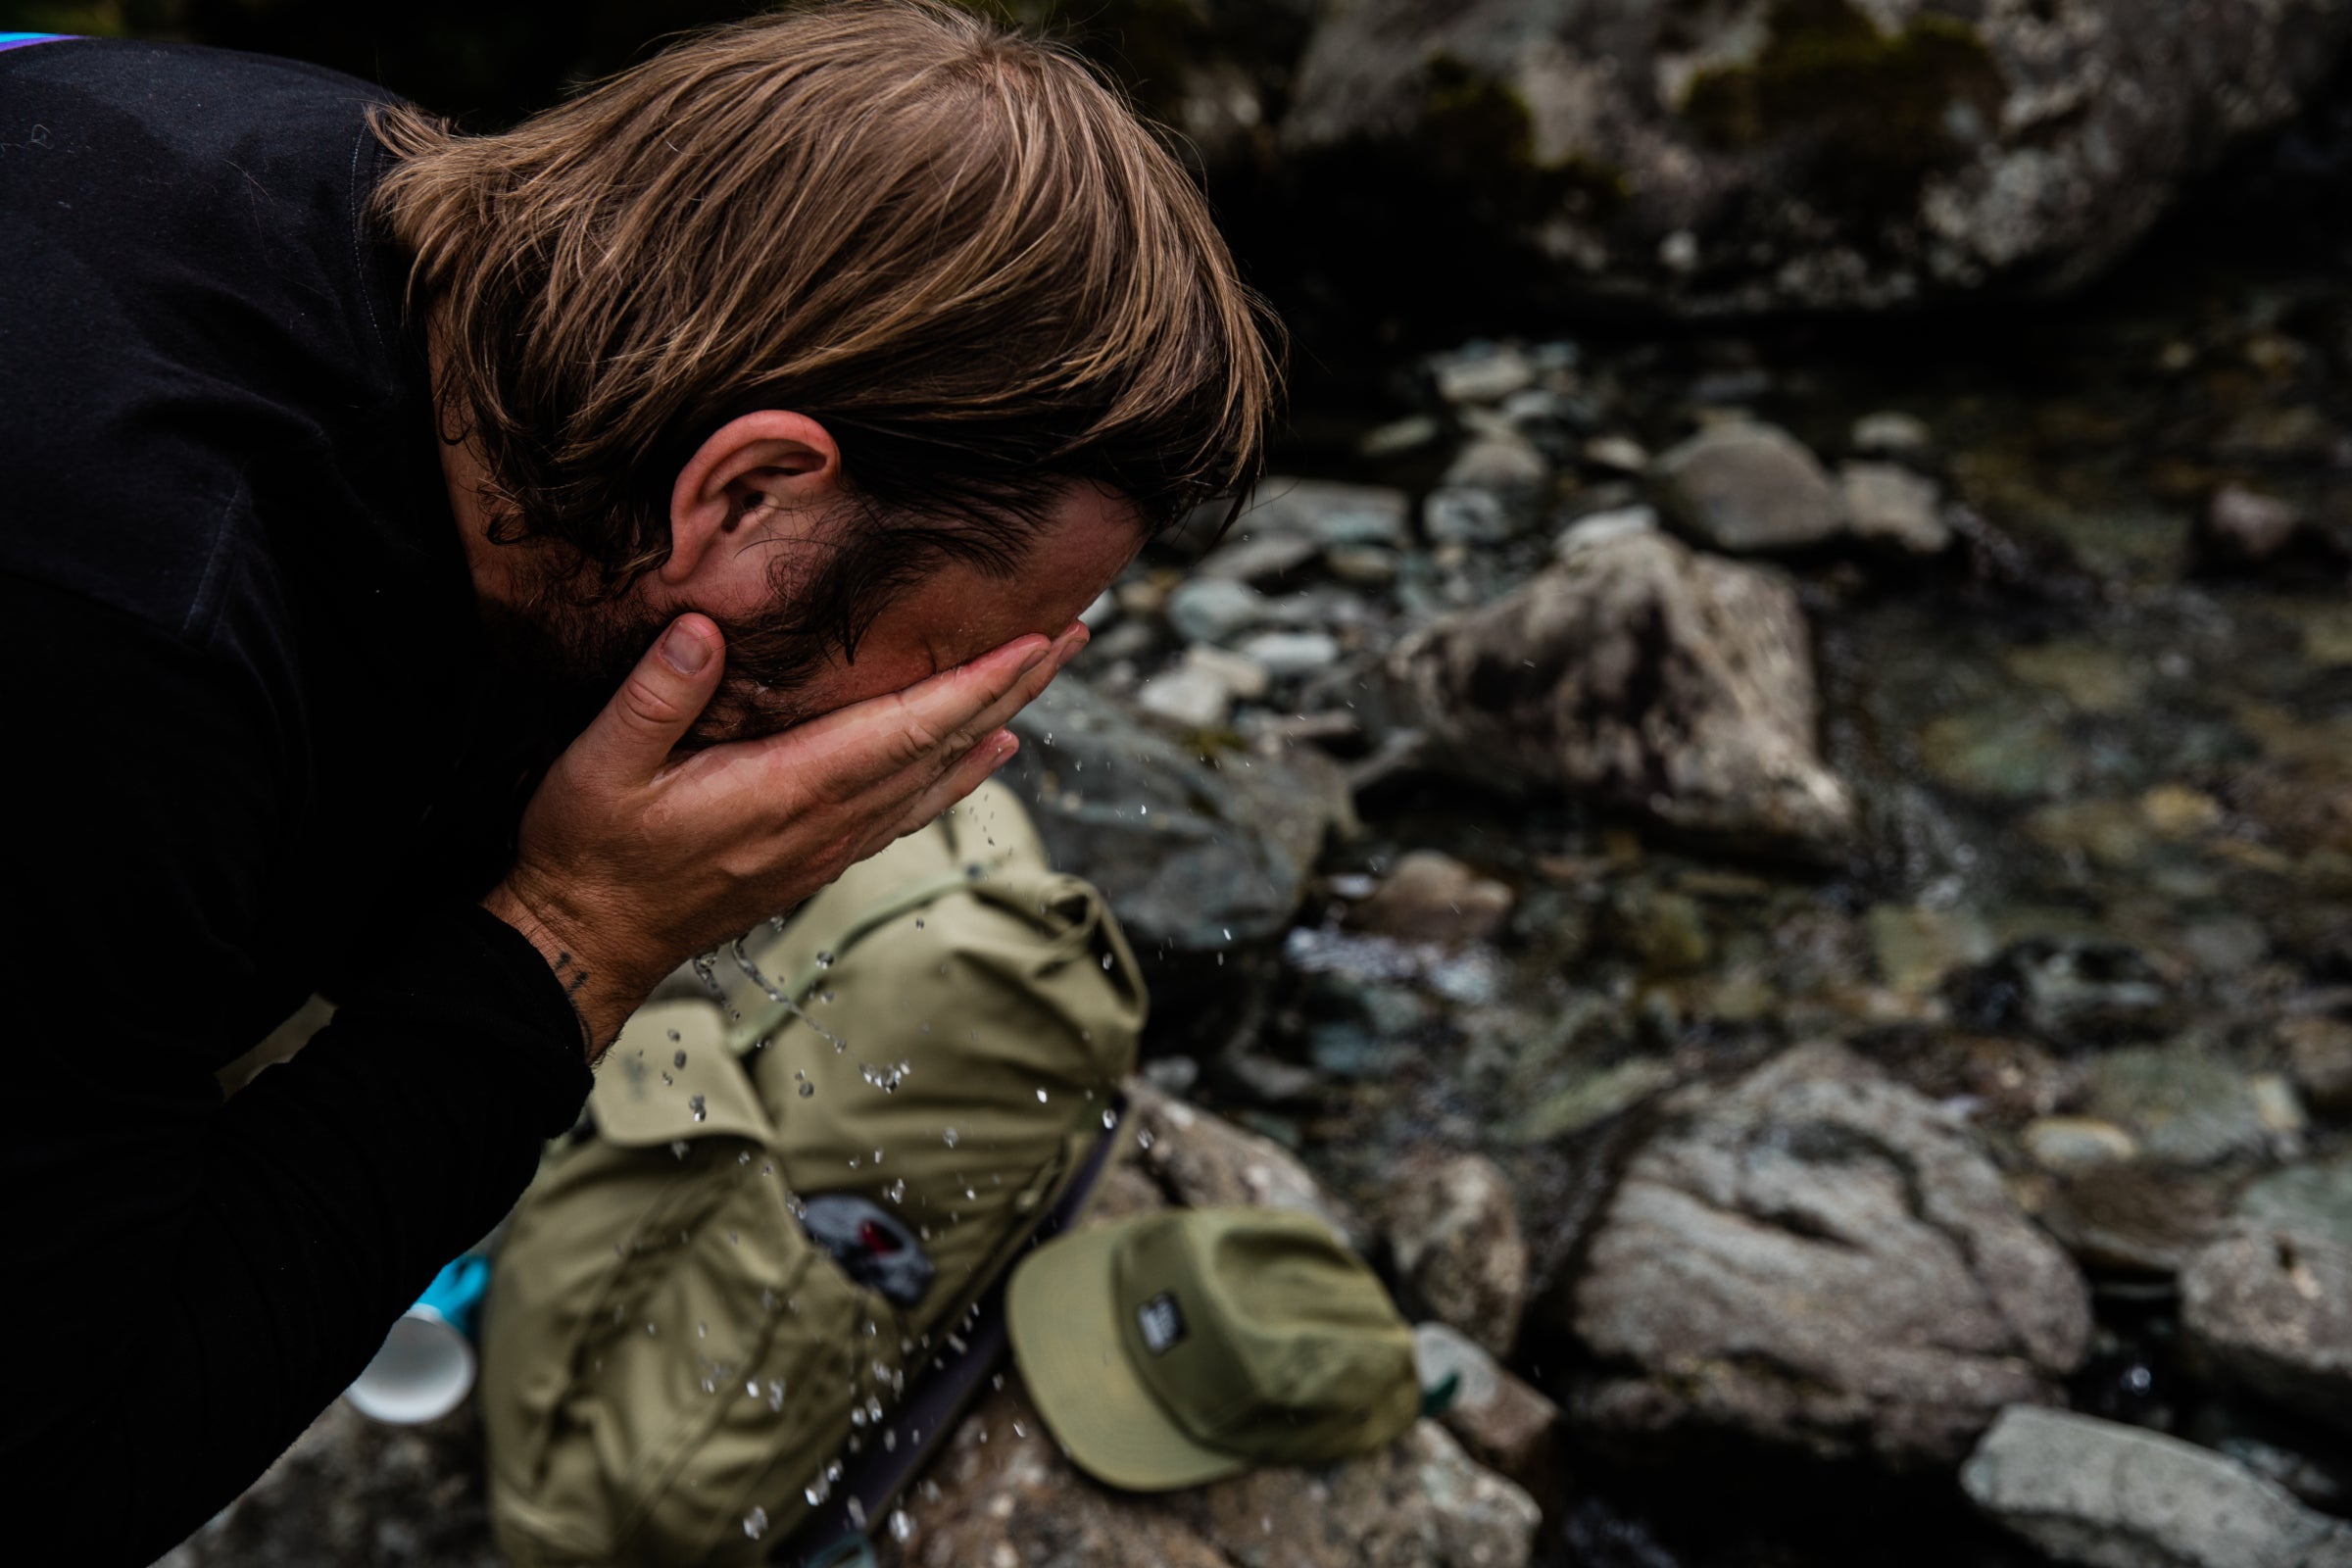 A man is washing his face with water from a rocky stream, with a green cap and Millican backpack placed beside him